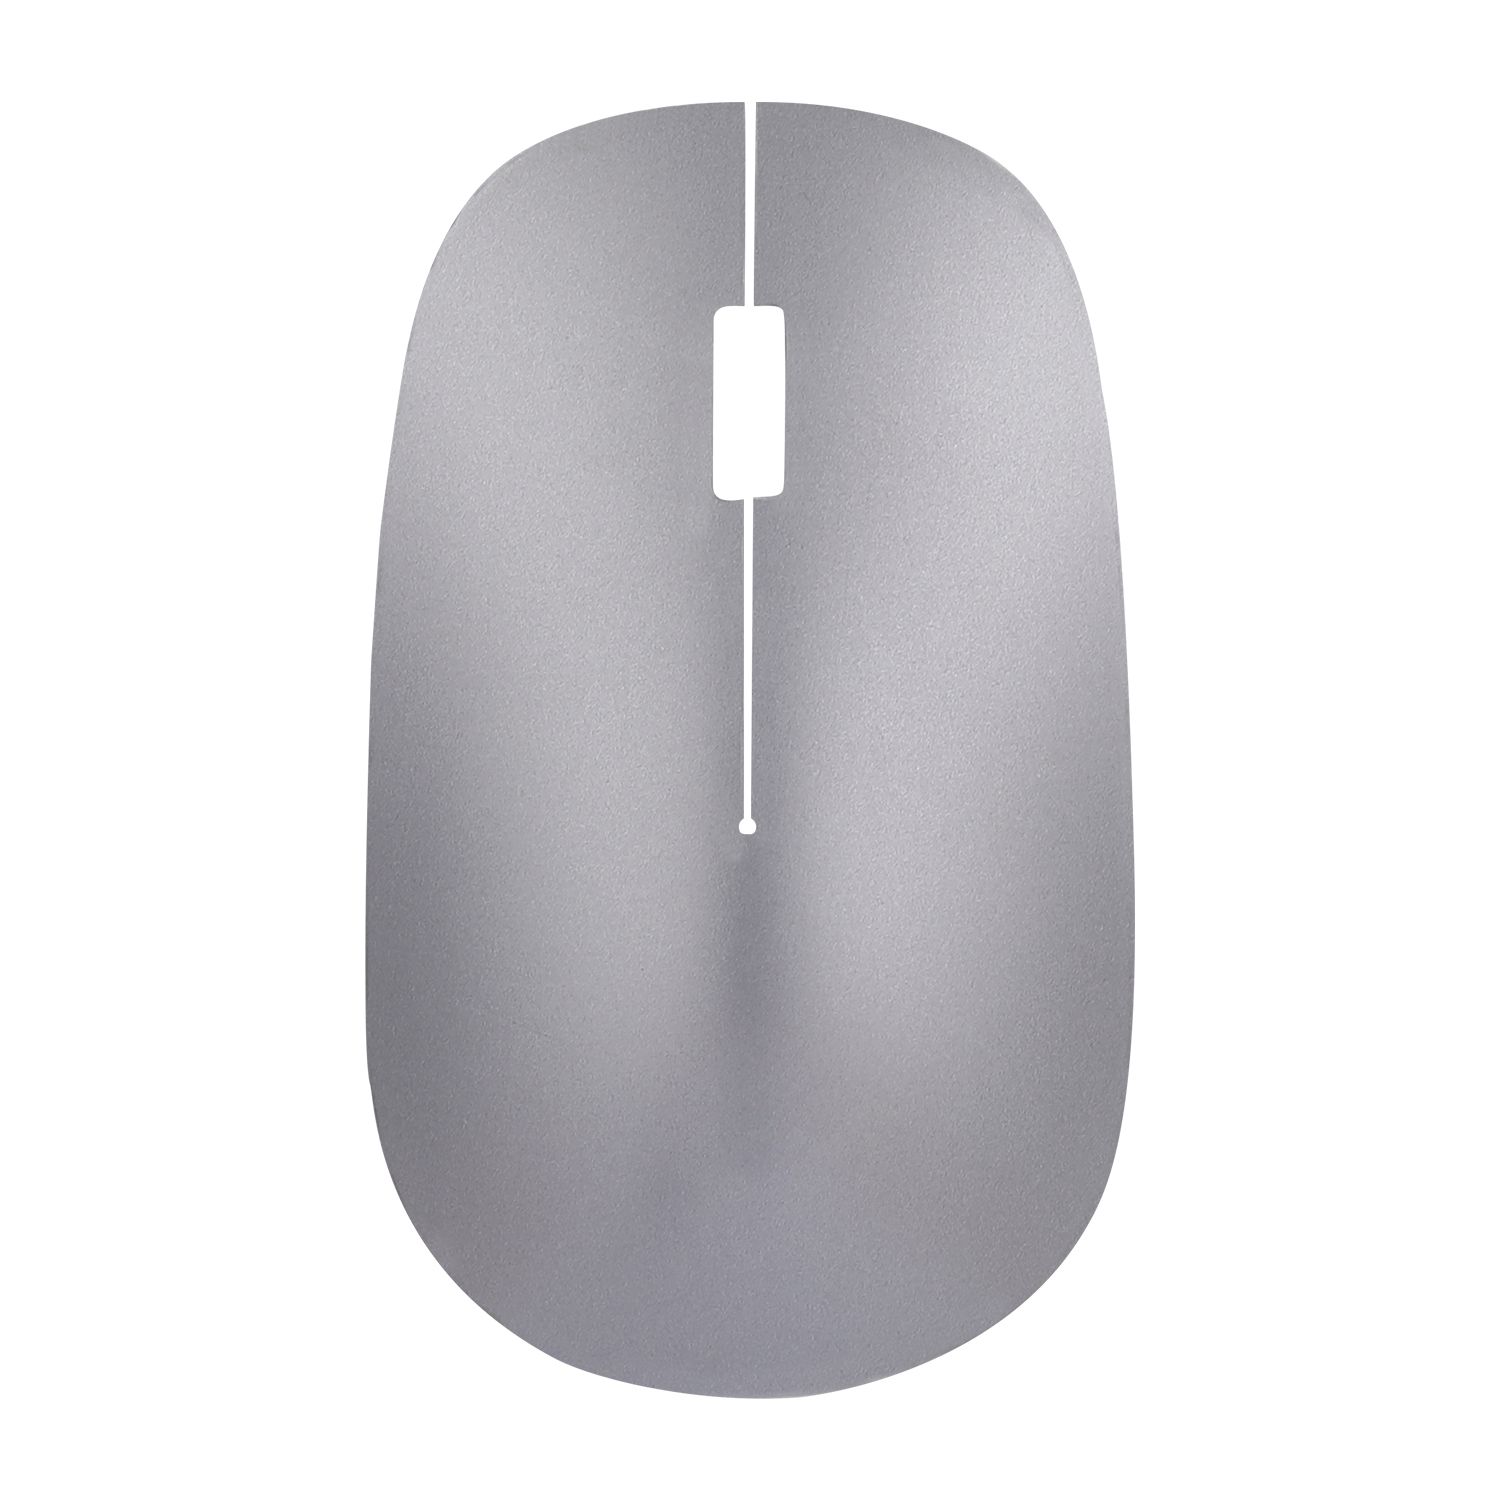 BUBM-WXSB-E-Wireless-Mouse-24GHz-Gaming-Optical-Mice-Office-Mouse-with-USB-Receiver-for-Laptop-PC-Co-1622093